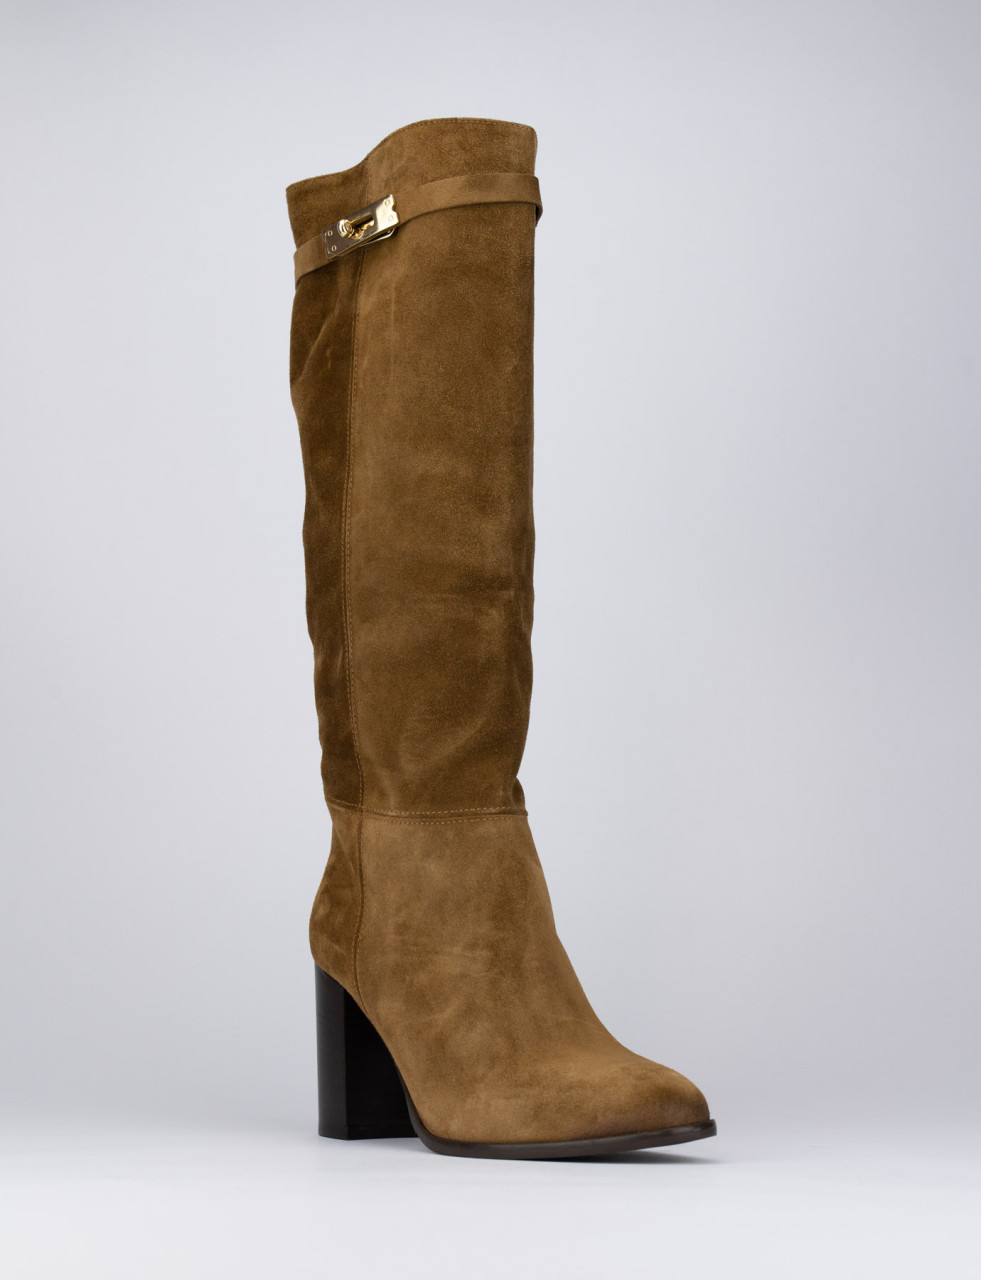 Women's high heel boots on sale | Barca Stores